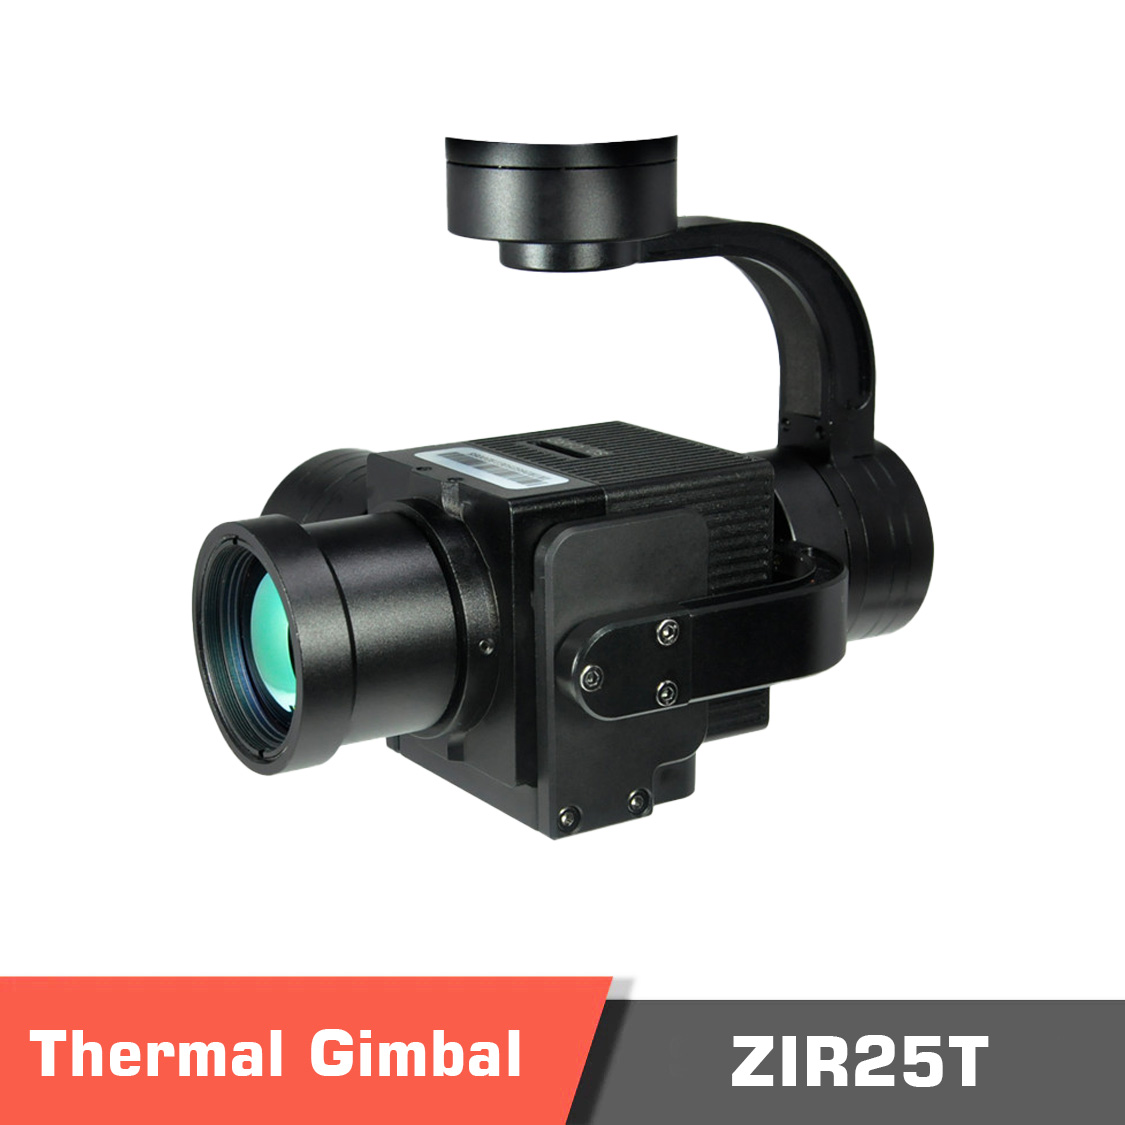 ZIR25T.temp .1 - A40TR Pro Gimbal Camera - MotioNew - 1